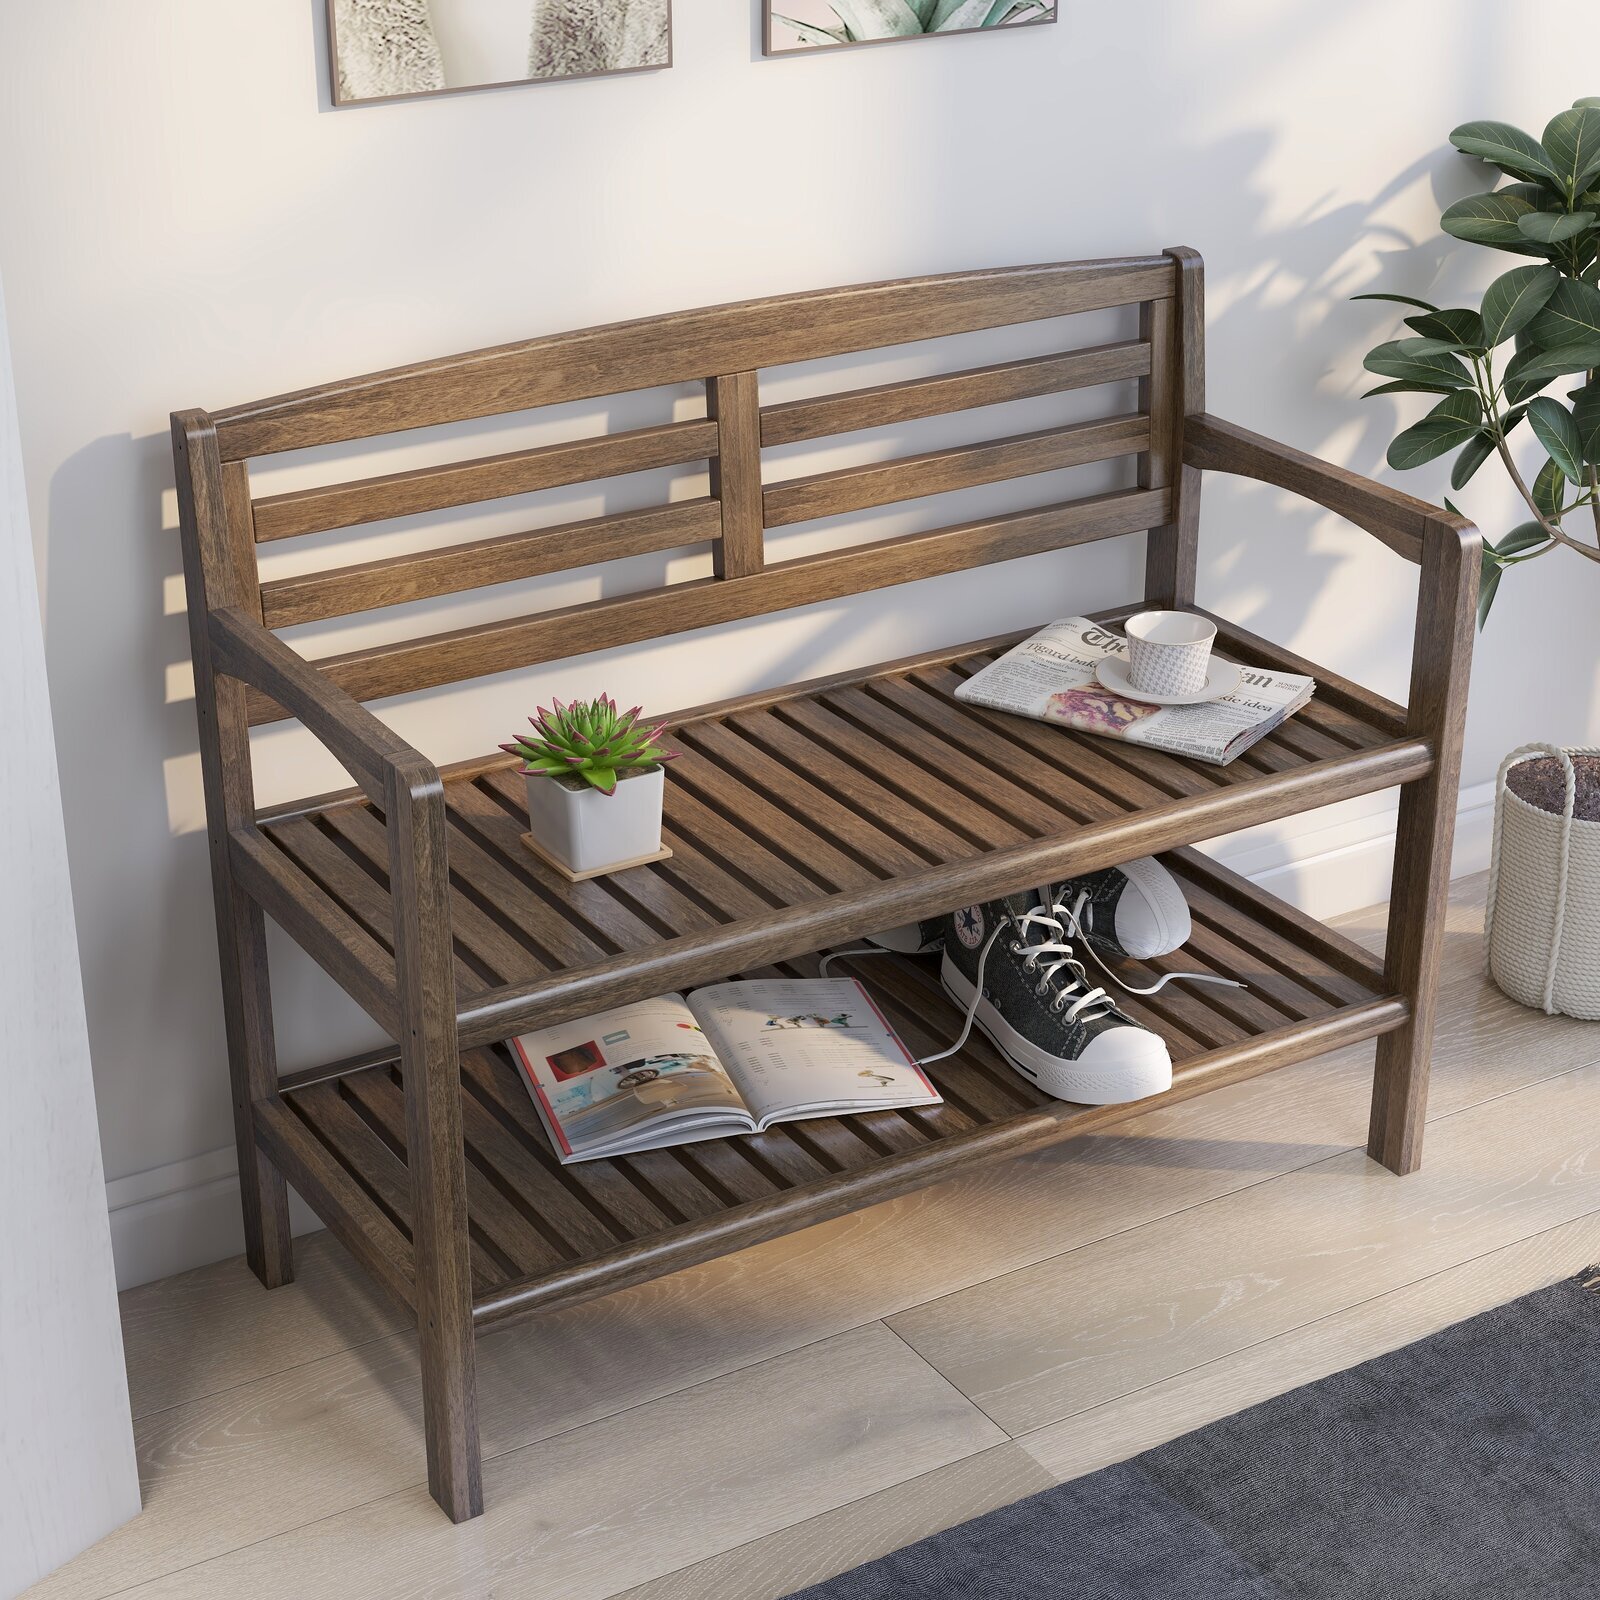 Foyer Wooden Bench with Shoe Storage